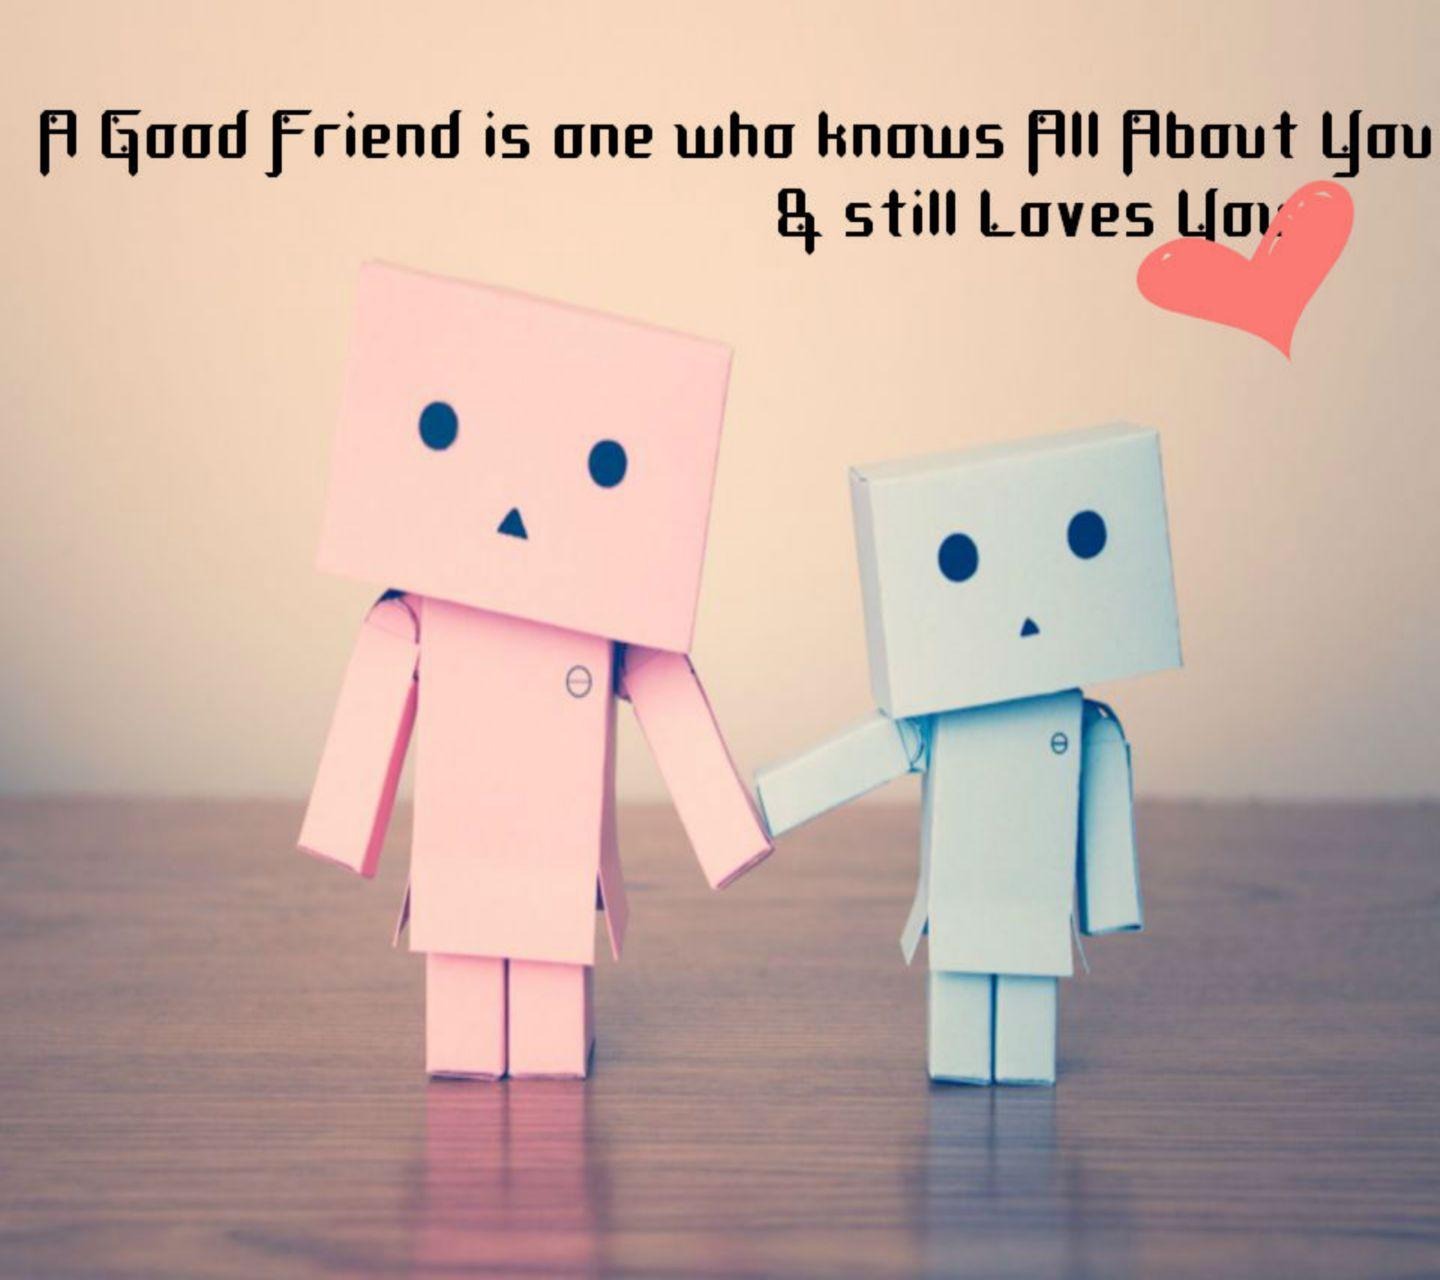 Wallpaper For > Wallpaper Of Friendship Thoughts